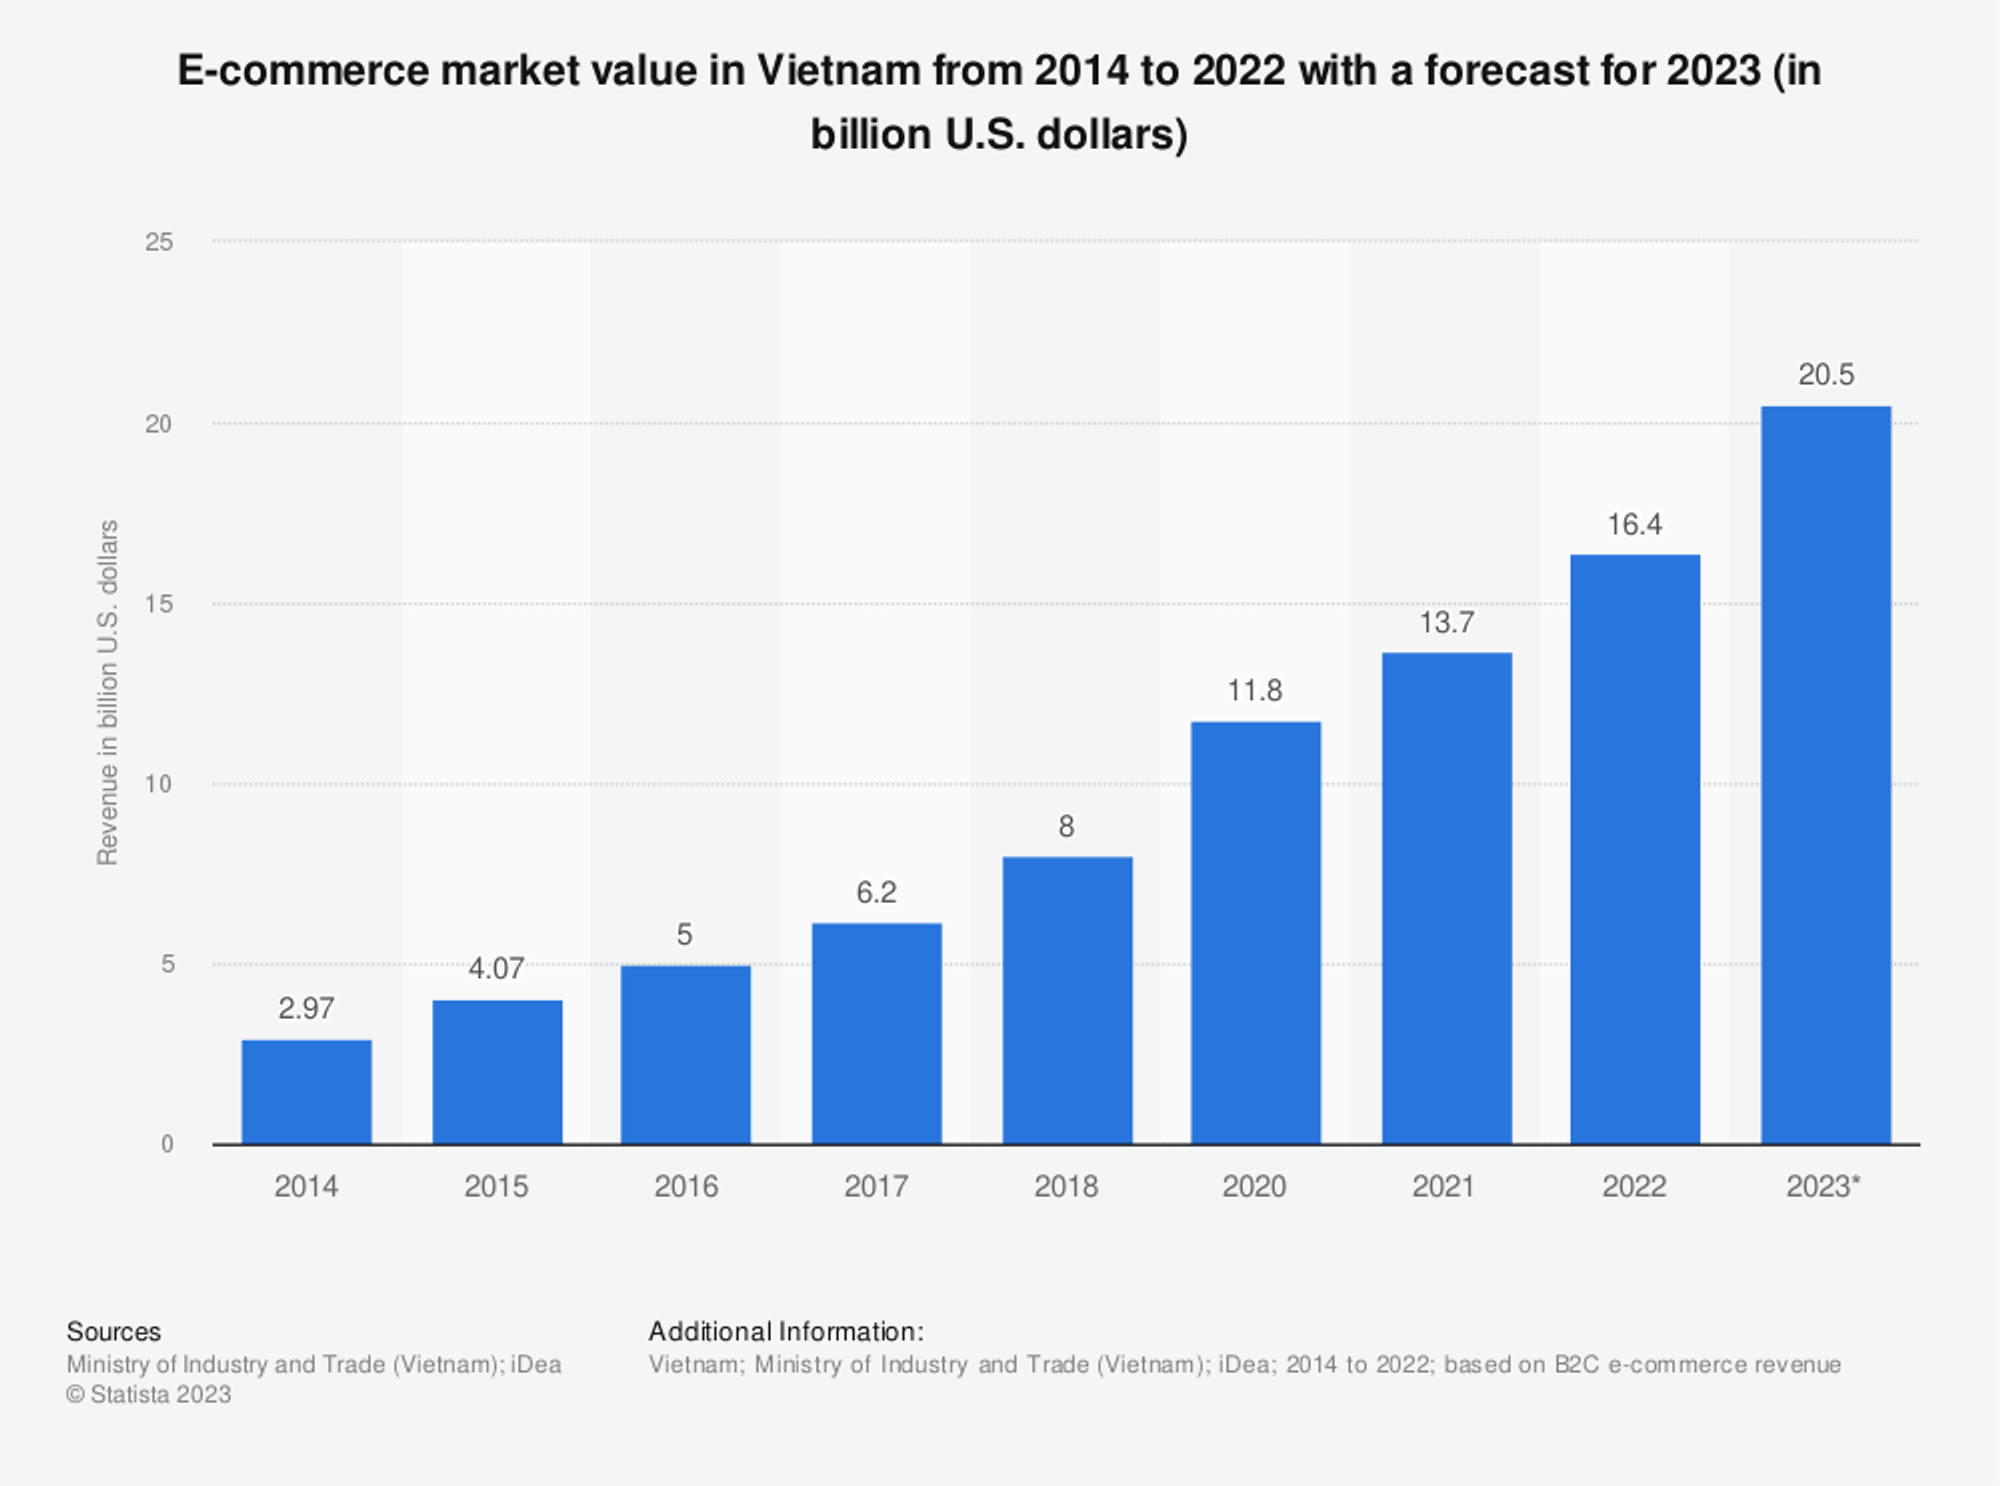 E-commerce_market_value_in_Vietnam_in_the_period_of_2014-2022_and_forecast_for_2023_t2kaor.png